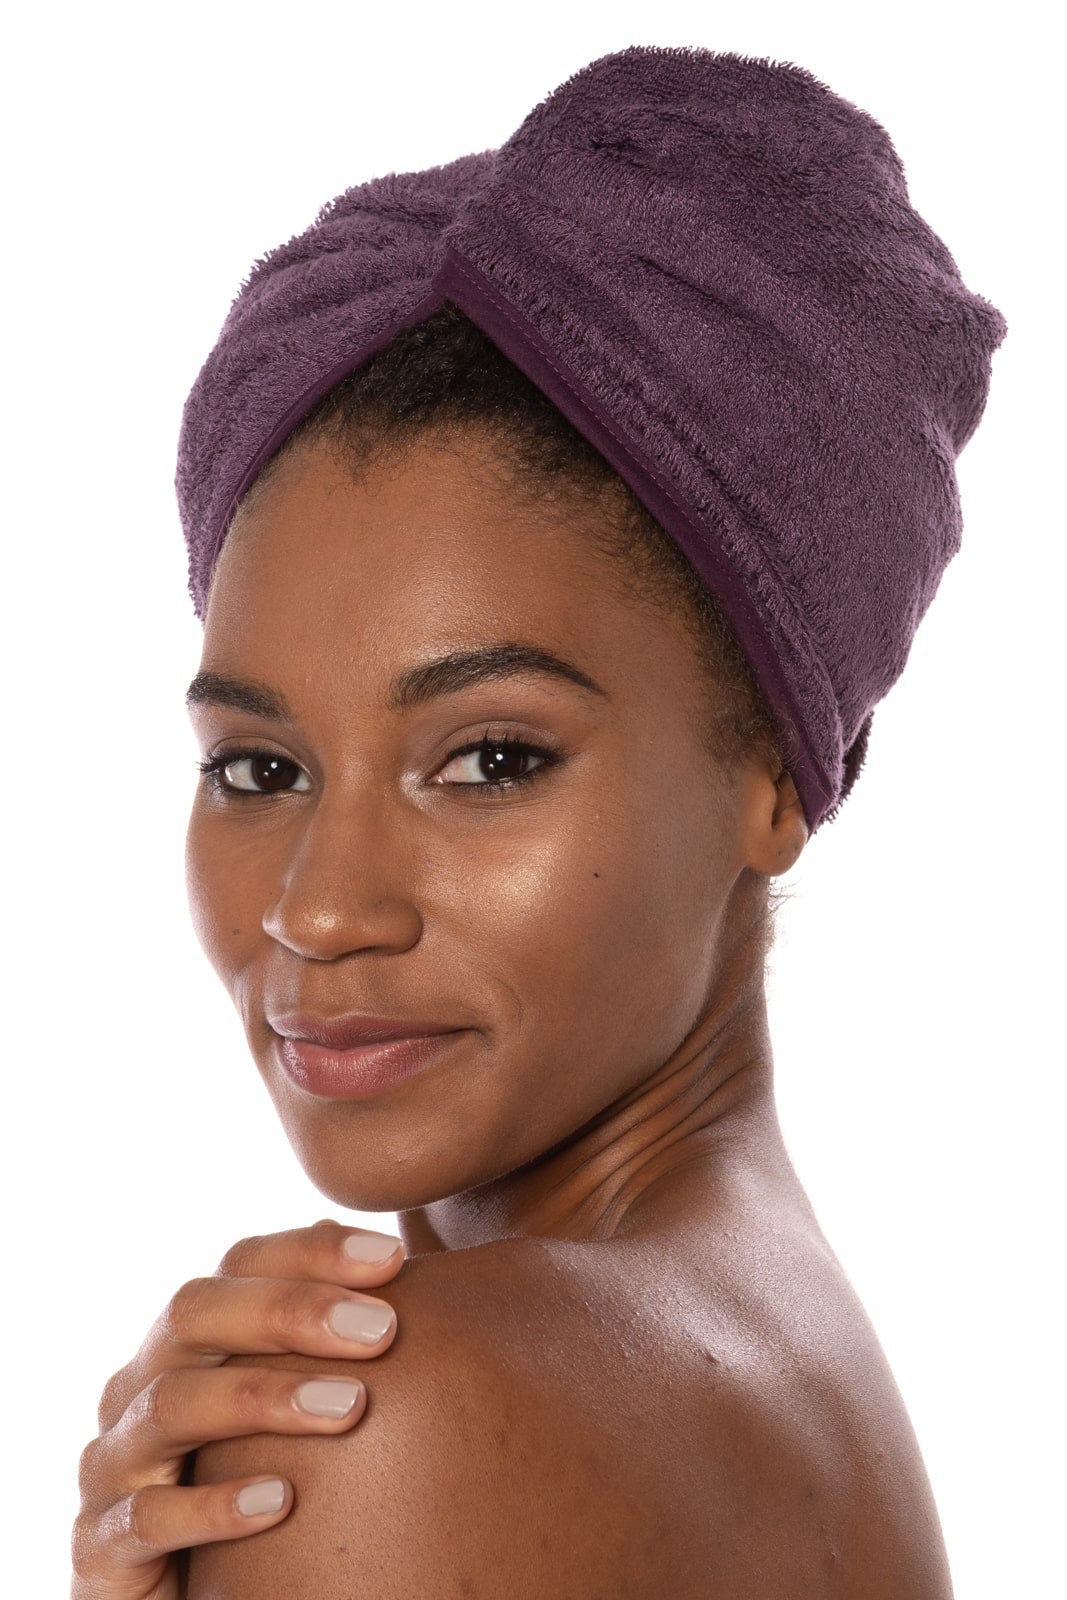 Fishers Finery Women's Terry Headwrap; Microfiber Hair Towel, Terry from Bamboo